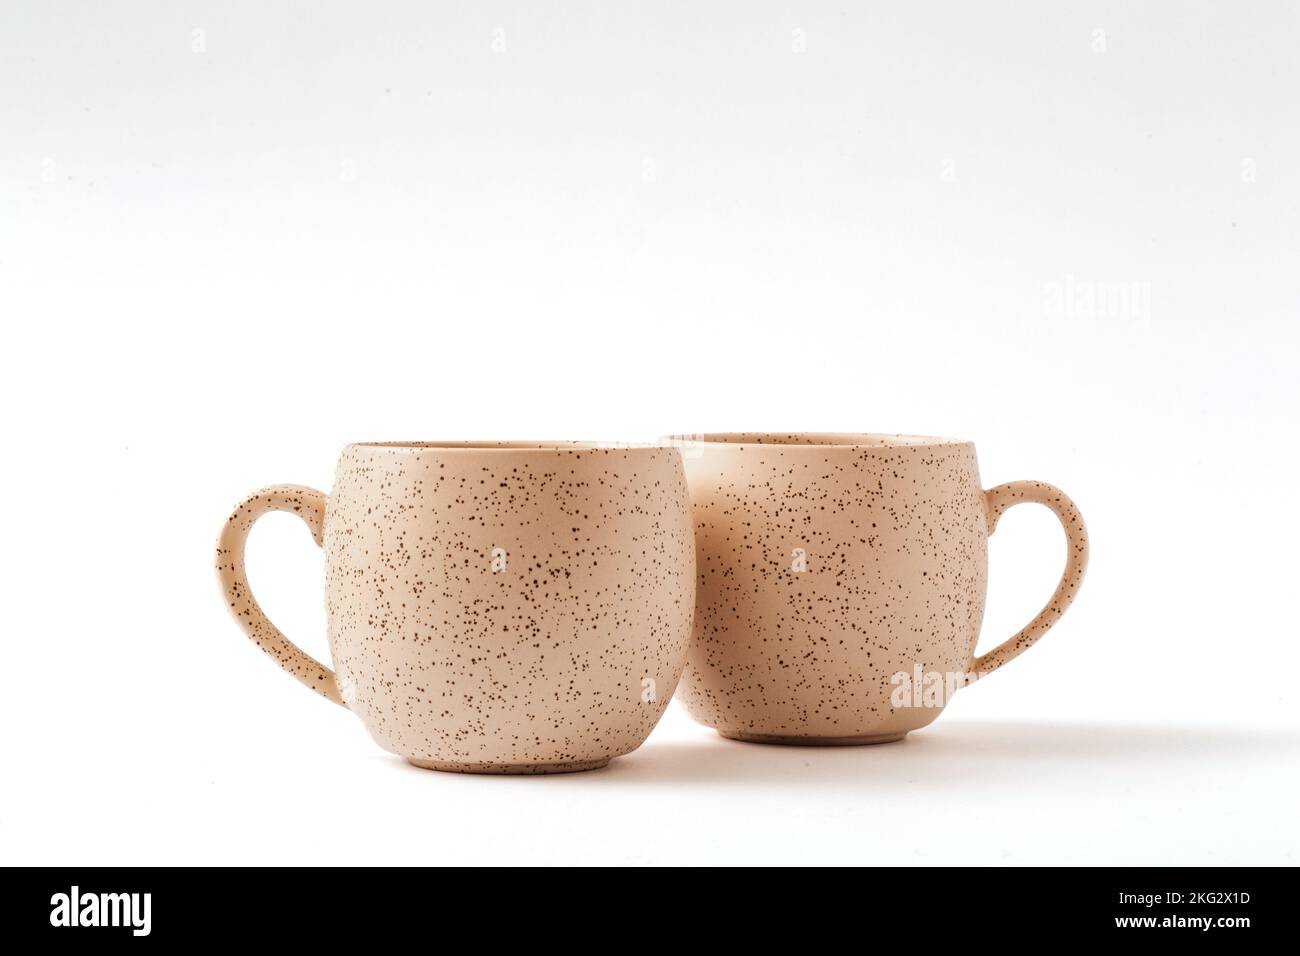 Empty beige coffee ceramic cups on isolated white background, cut out. Stock Photo